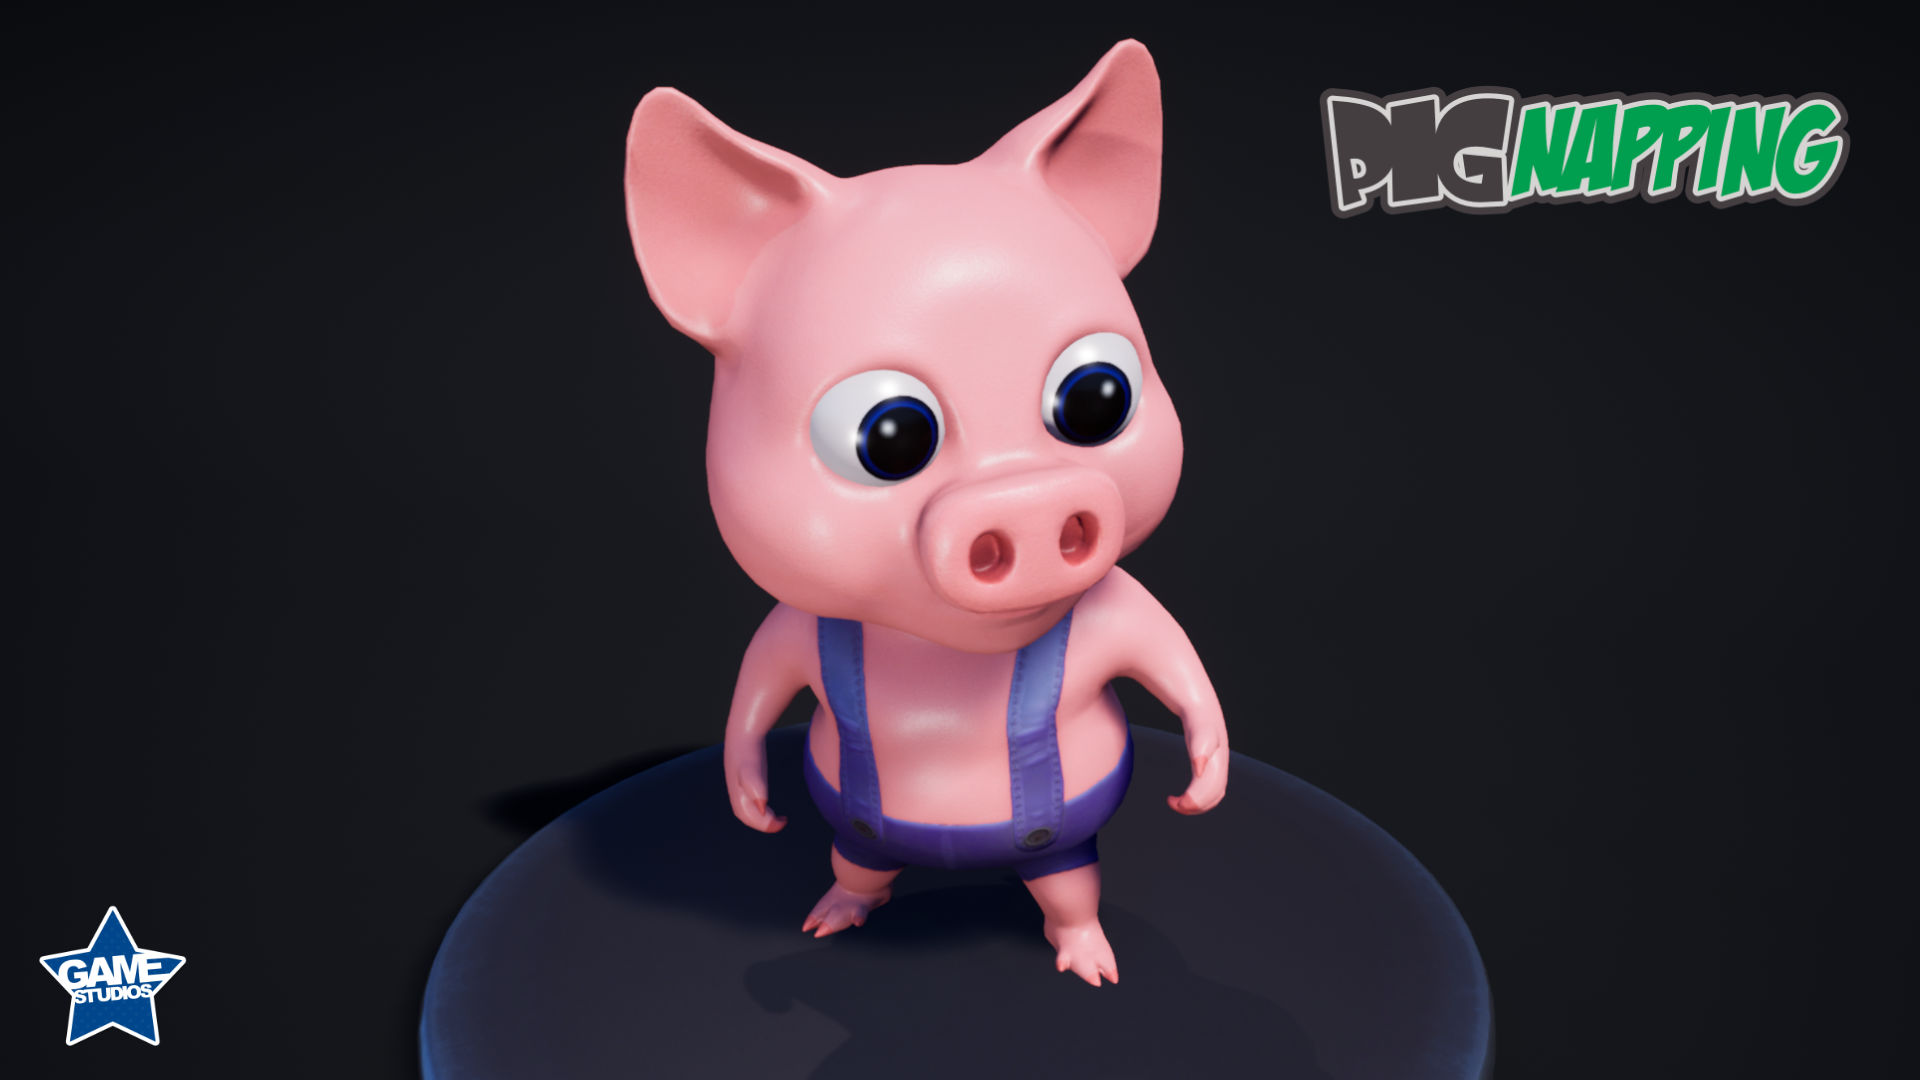 Front Top - Pig 3d Character - PigNapping